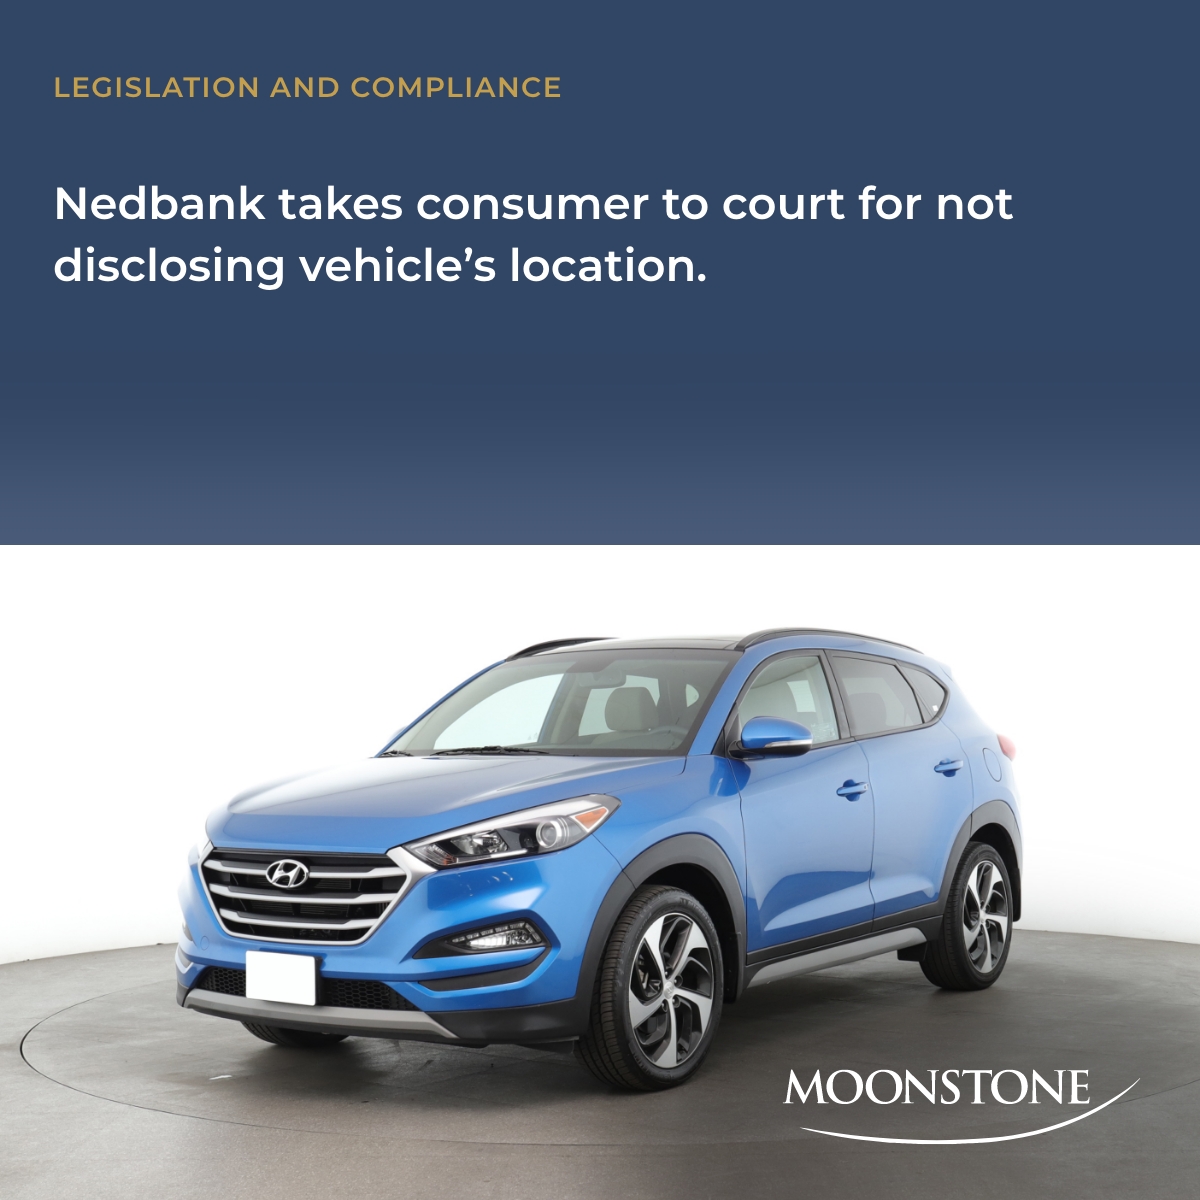 Consumer faces contempt of court charge after failing to comply with National Credit Act. moonstone.co.za/nedbank-takes-… 
#contemptofcourt #creditagreement #HighCourt #motorvehicle #NationalCreditAct #Nedbank #Financialservices